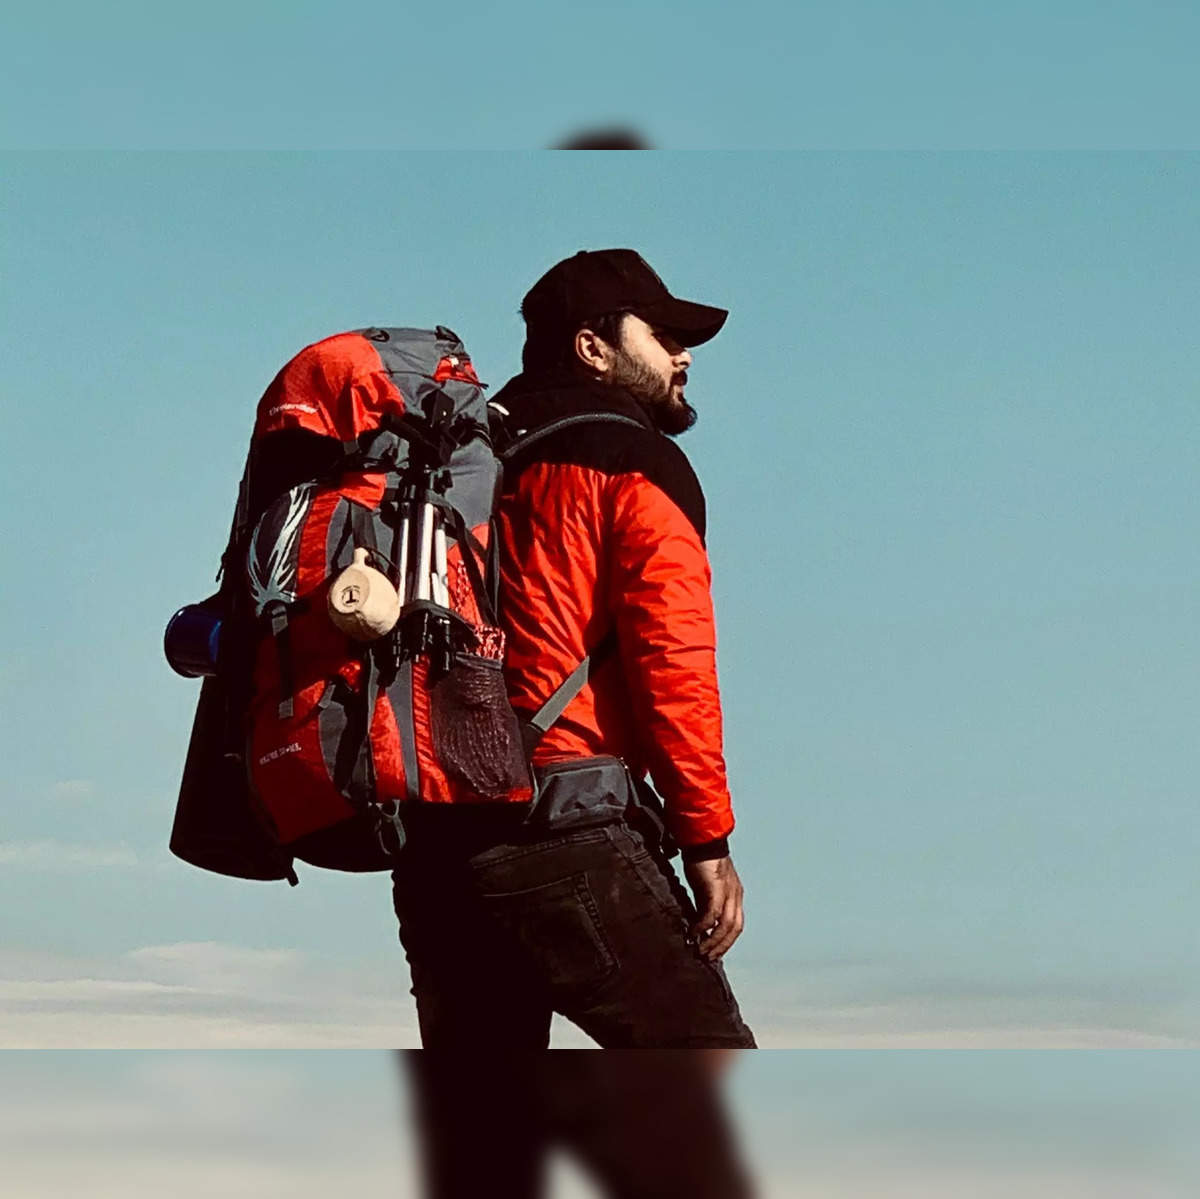 Travel Backpack: 10 Best Travel Backpacks in India To Make Your Trips  Easier (2023) - The Economic Times